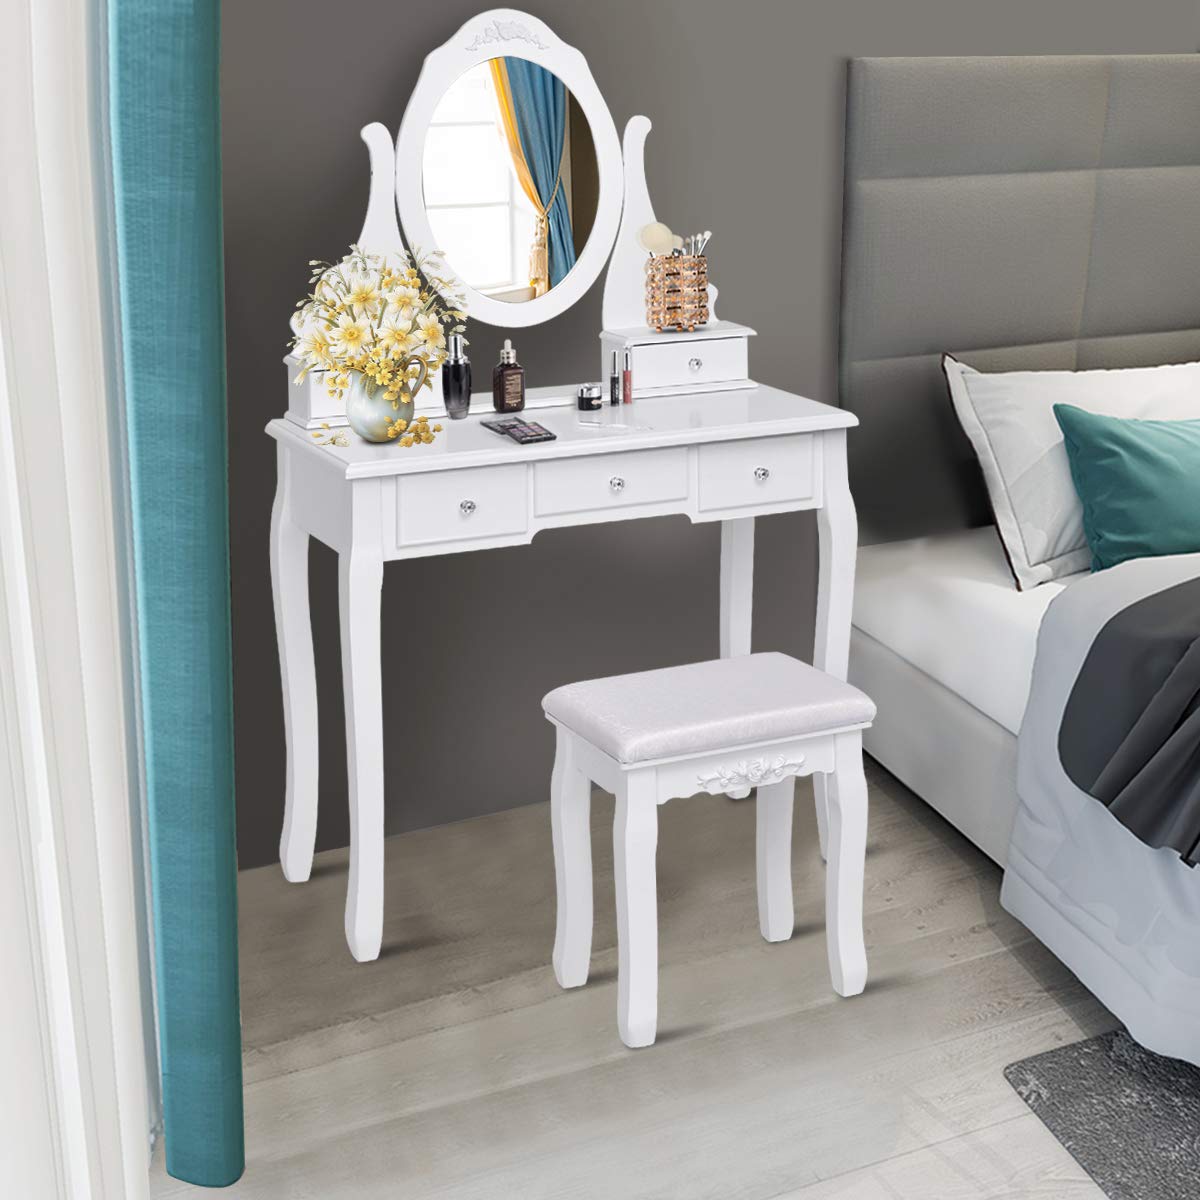 Giantex Makeup Dressing Table Large Storage with 5 Drawers